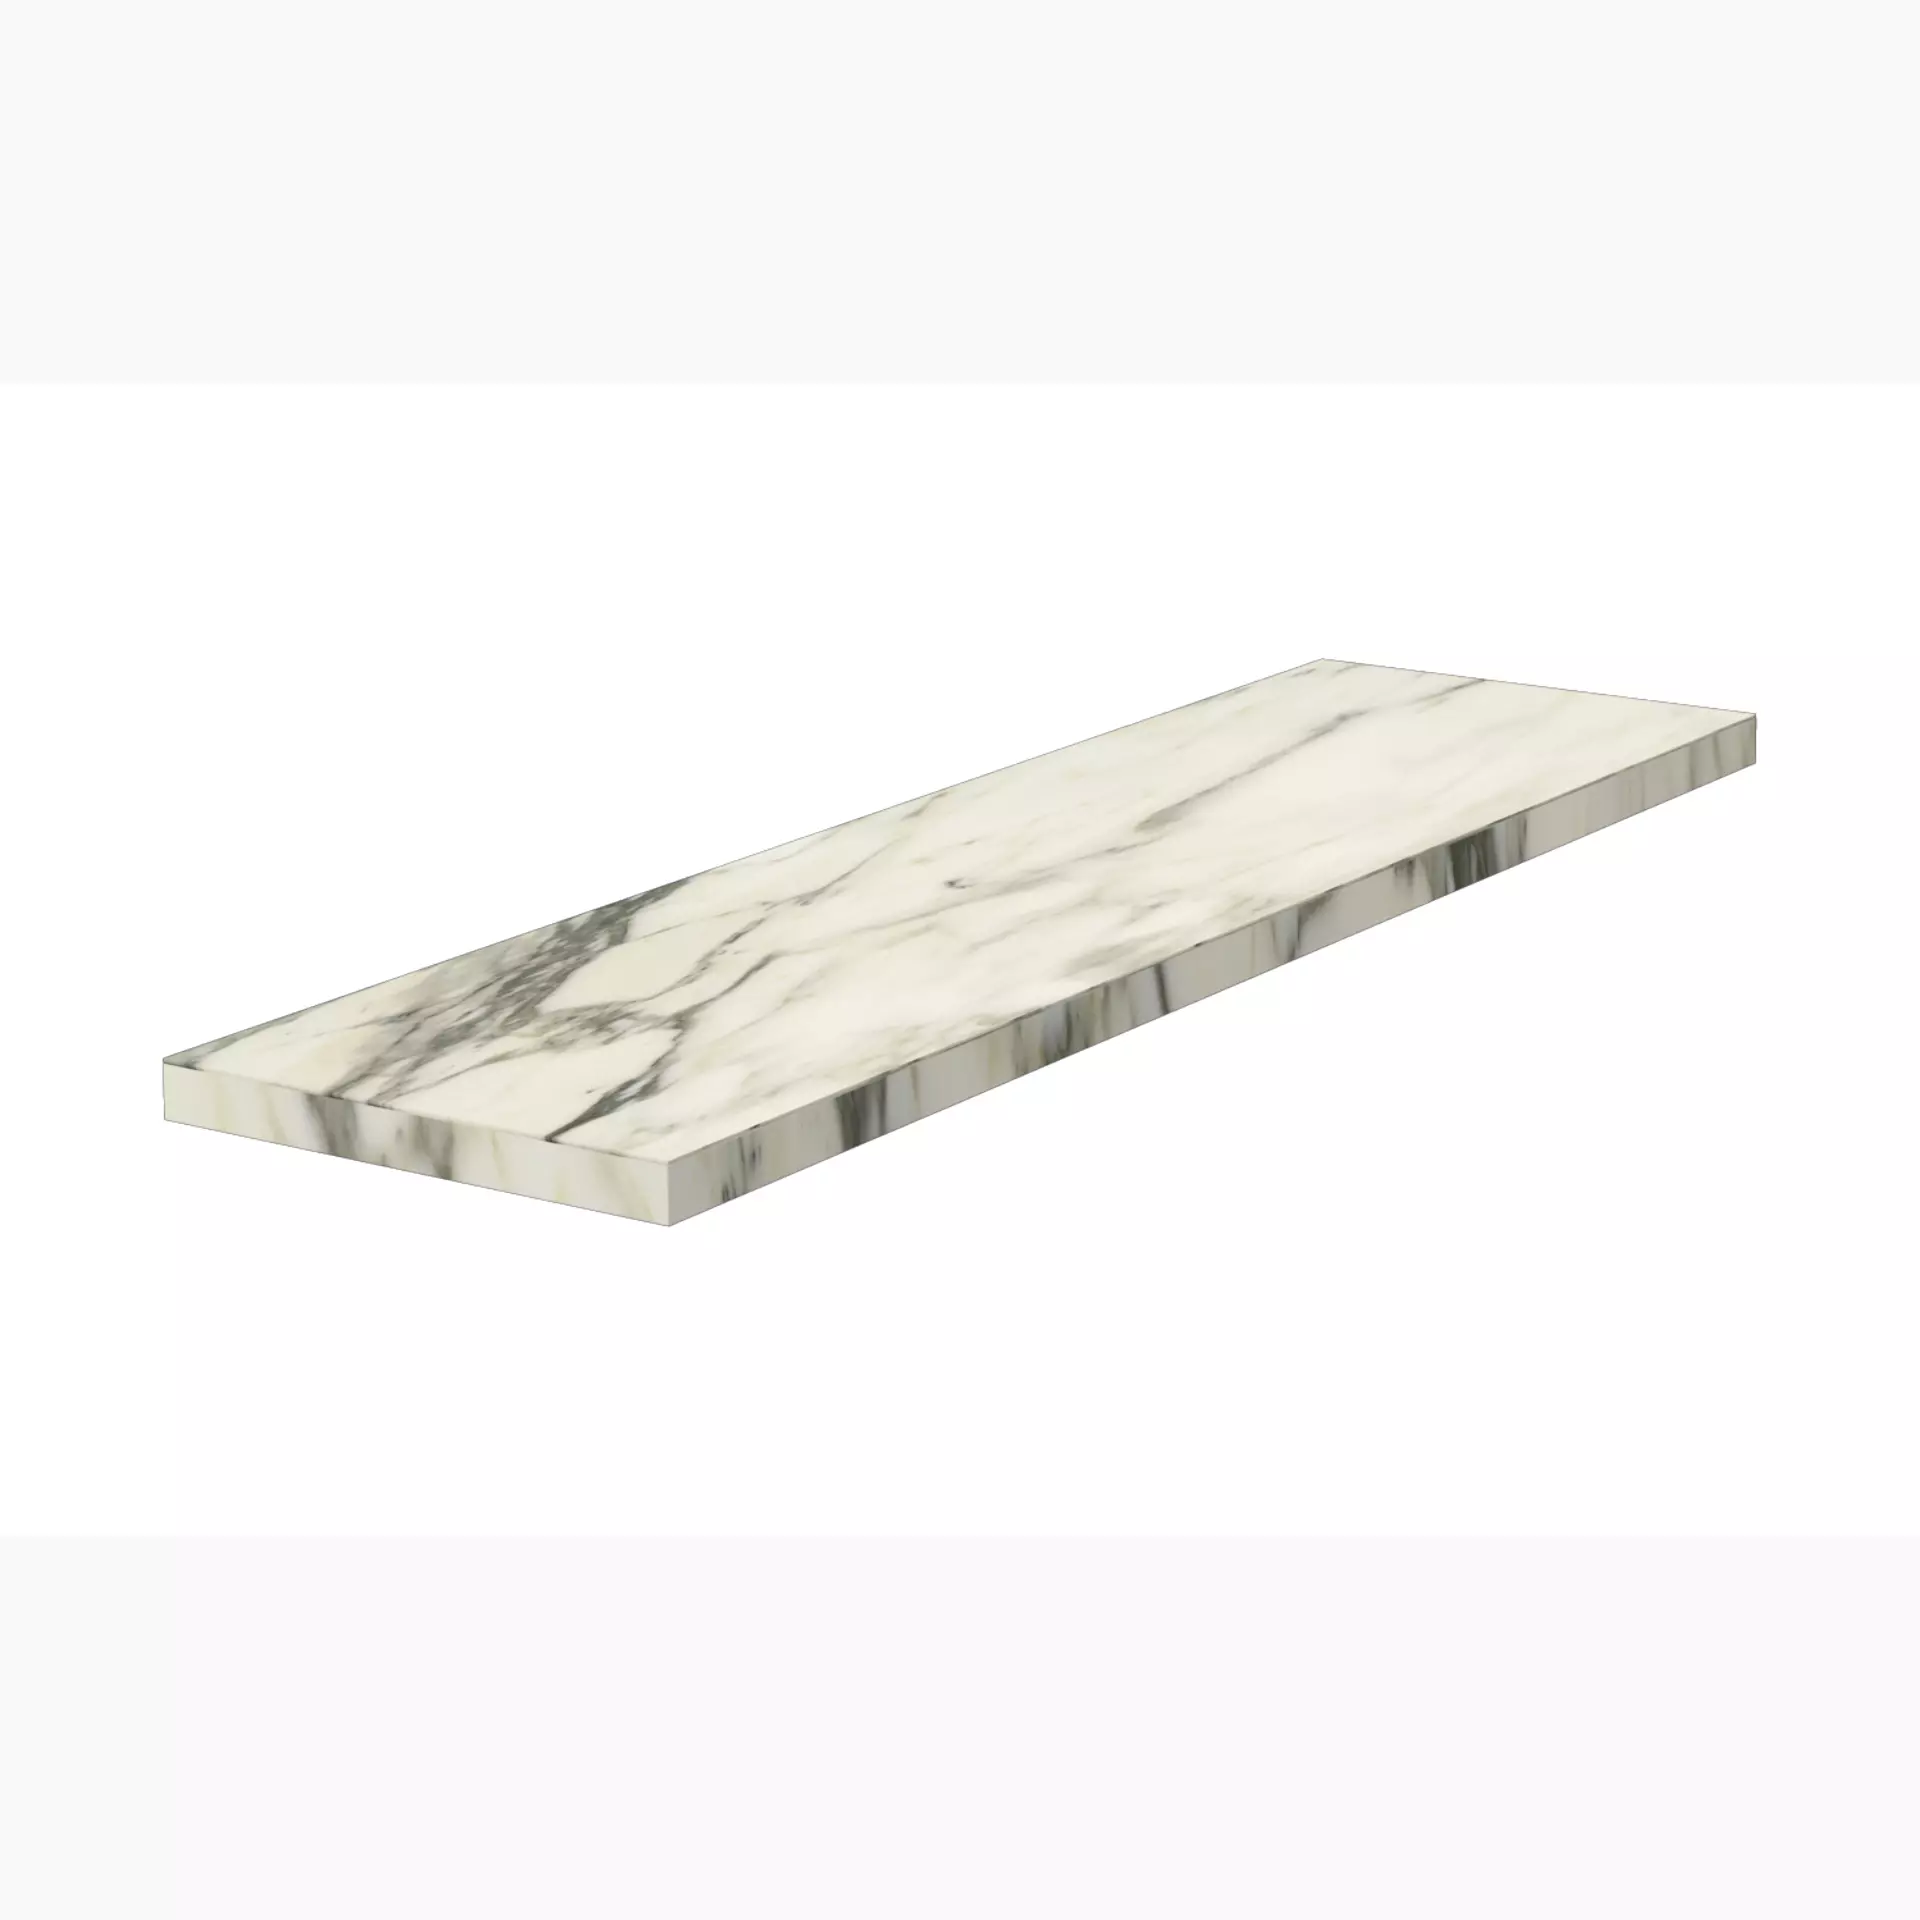 Del Conca Hpm Premiere Paonazzo Hpm Naturale Corner plate Step Right G3PM10RGD 33x120cm rectified 8,5mm